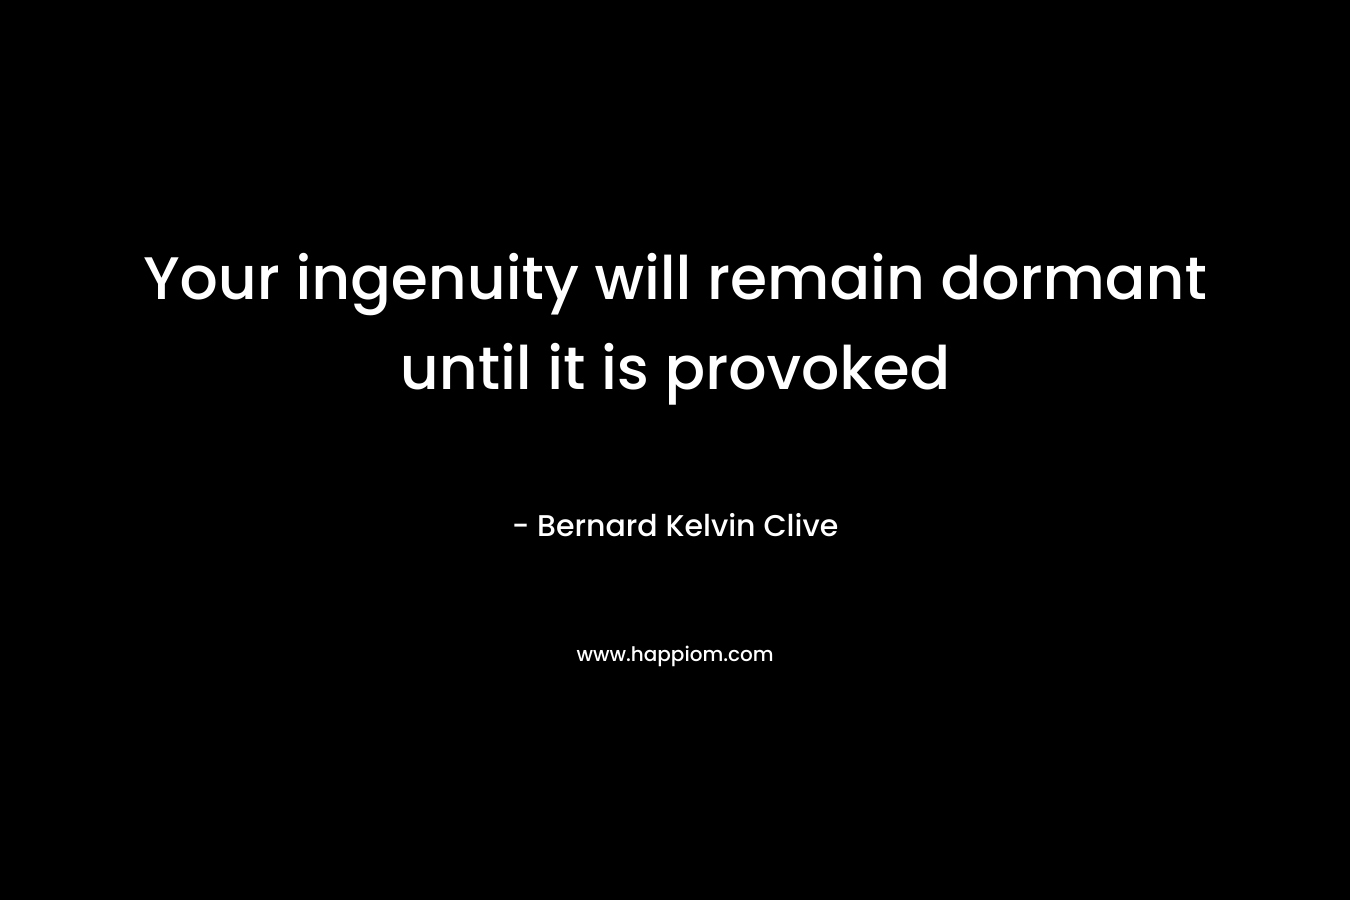 Your ingenuity will remain dormant until it is provoked – Bernard Kelvin Clive